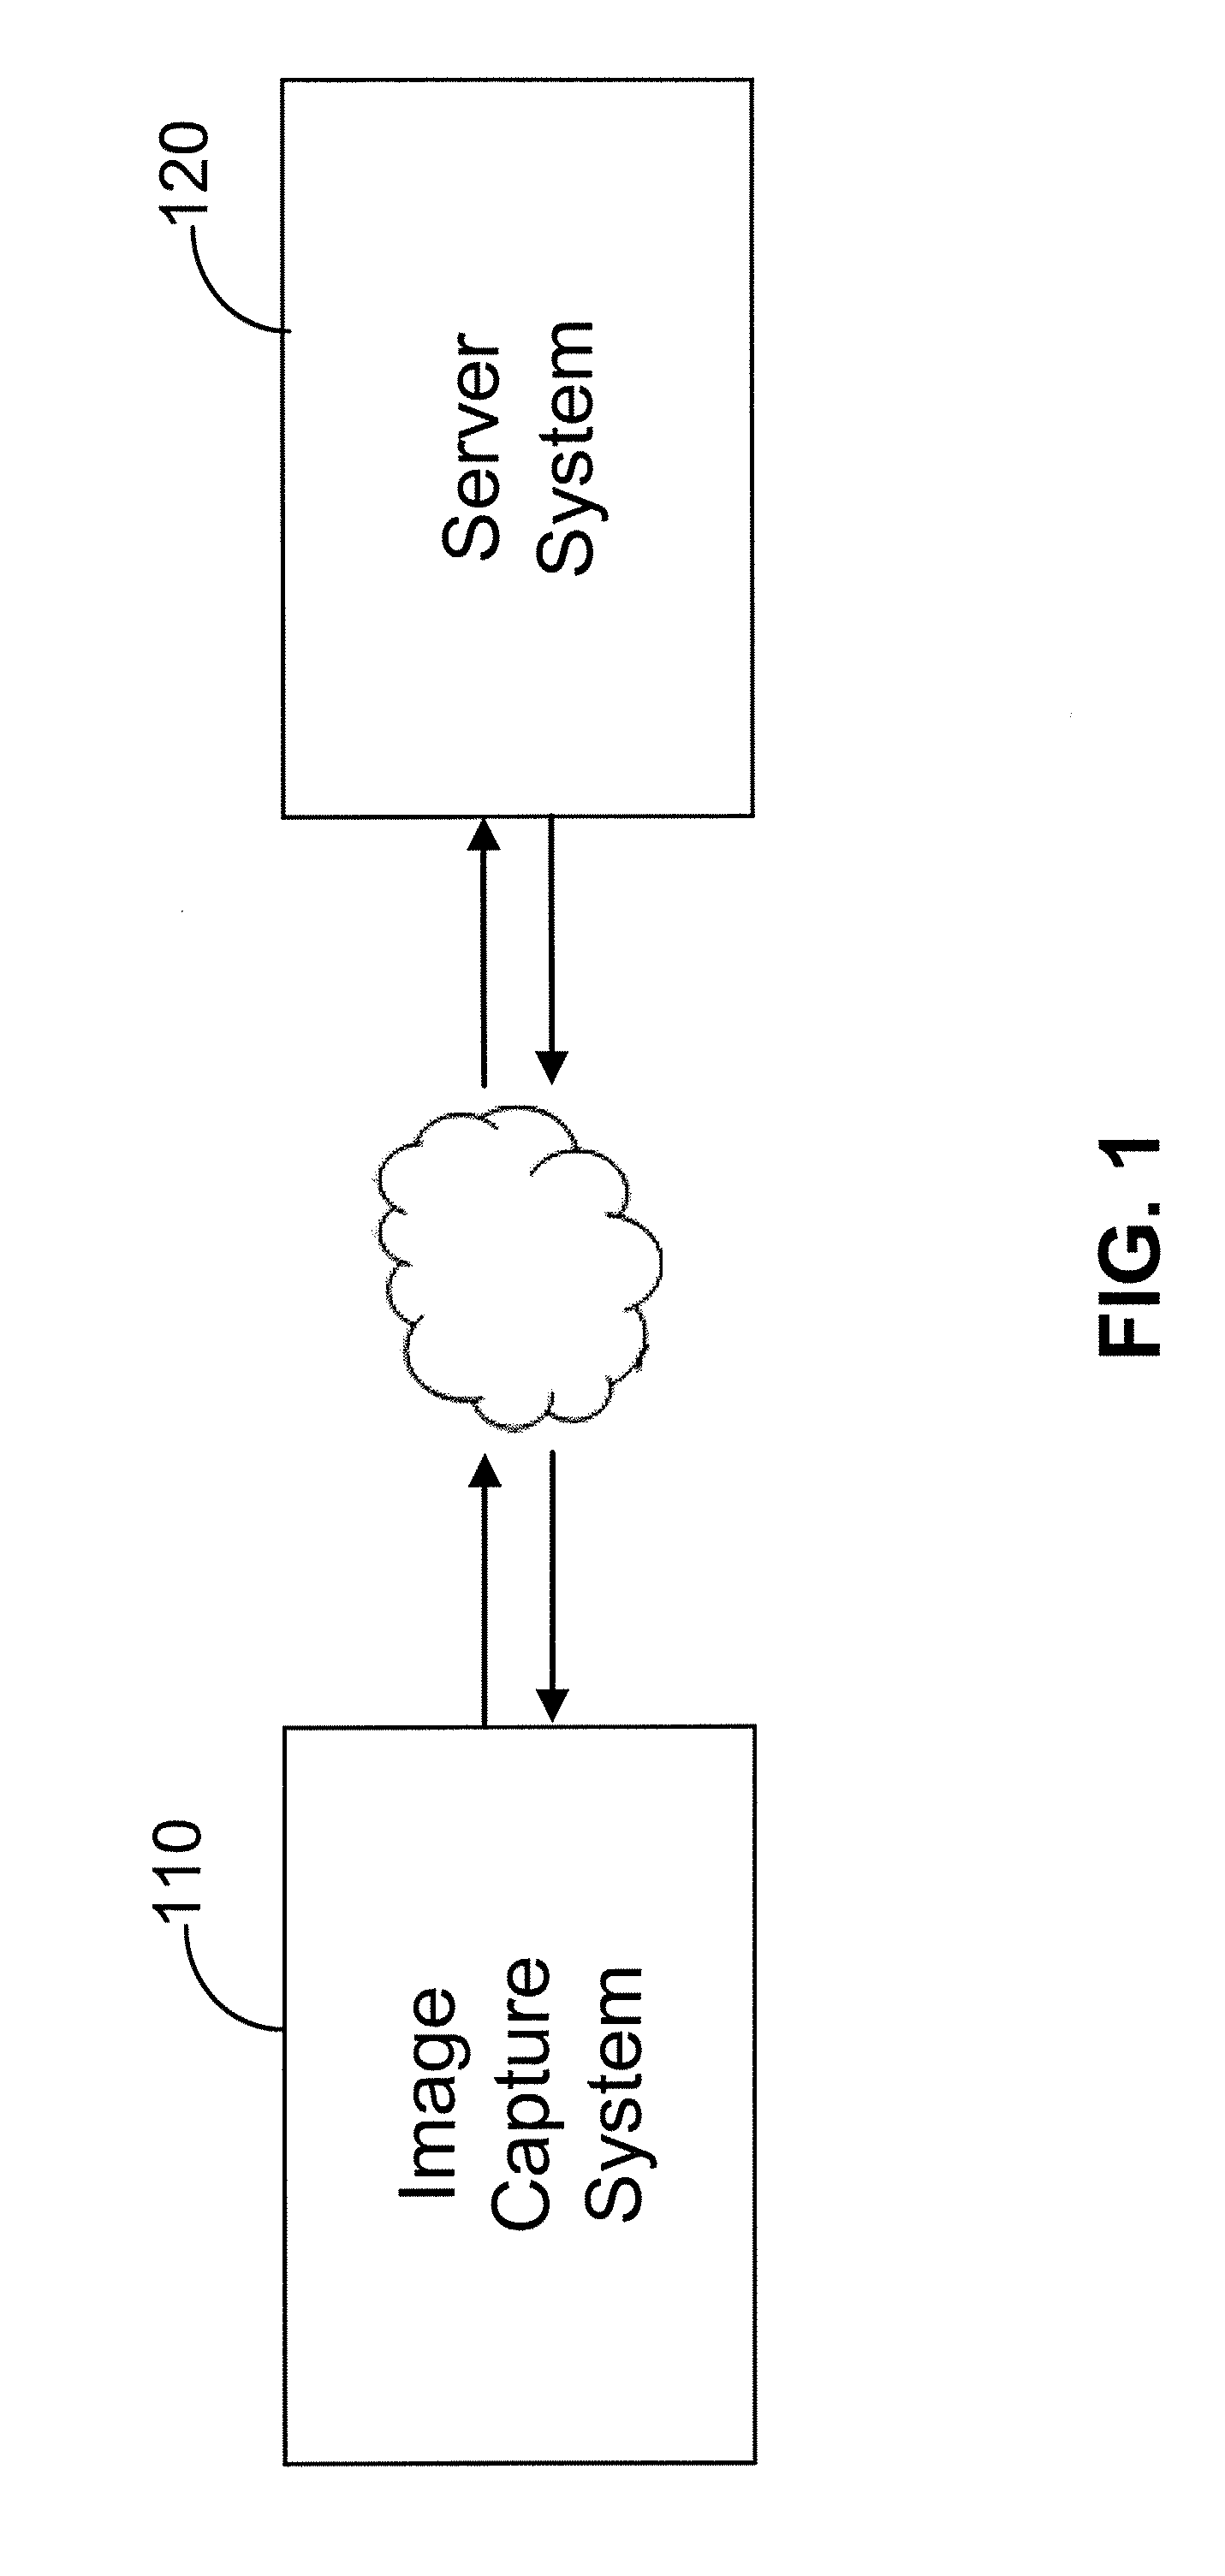 Systems and methods for enabling manual classification of unrecognized documents to complete workflow for electronic jobs and to assist machine learning of a recognition system using automatically extracted features of unrecognized documents